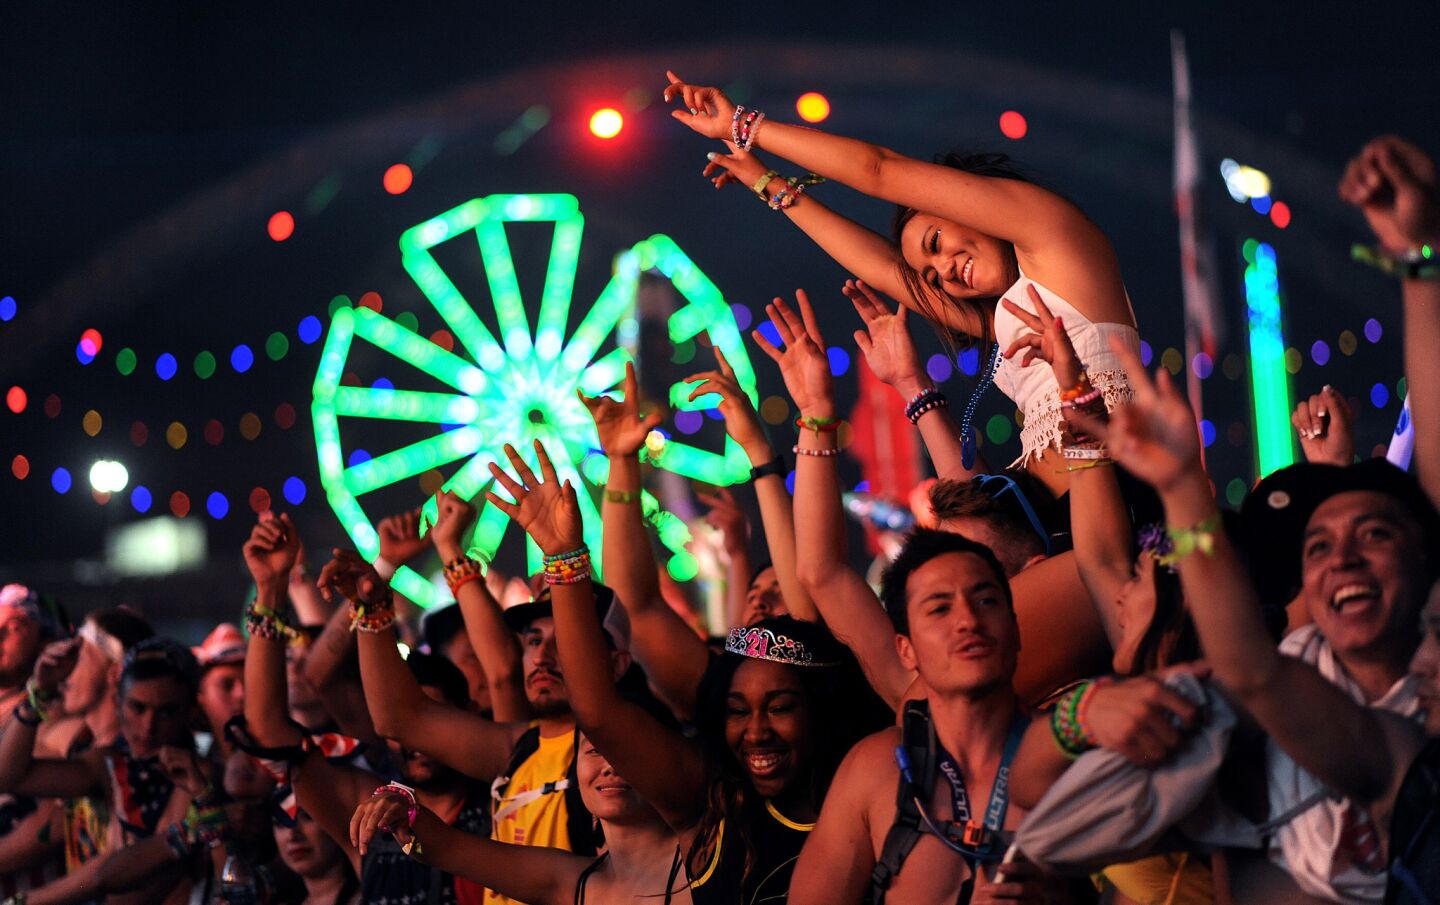 Fans enjoy a concert at Kinetic Field during the Electric Daisy Carnival in Las Vegas on June 17.